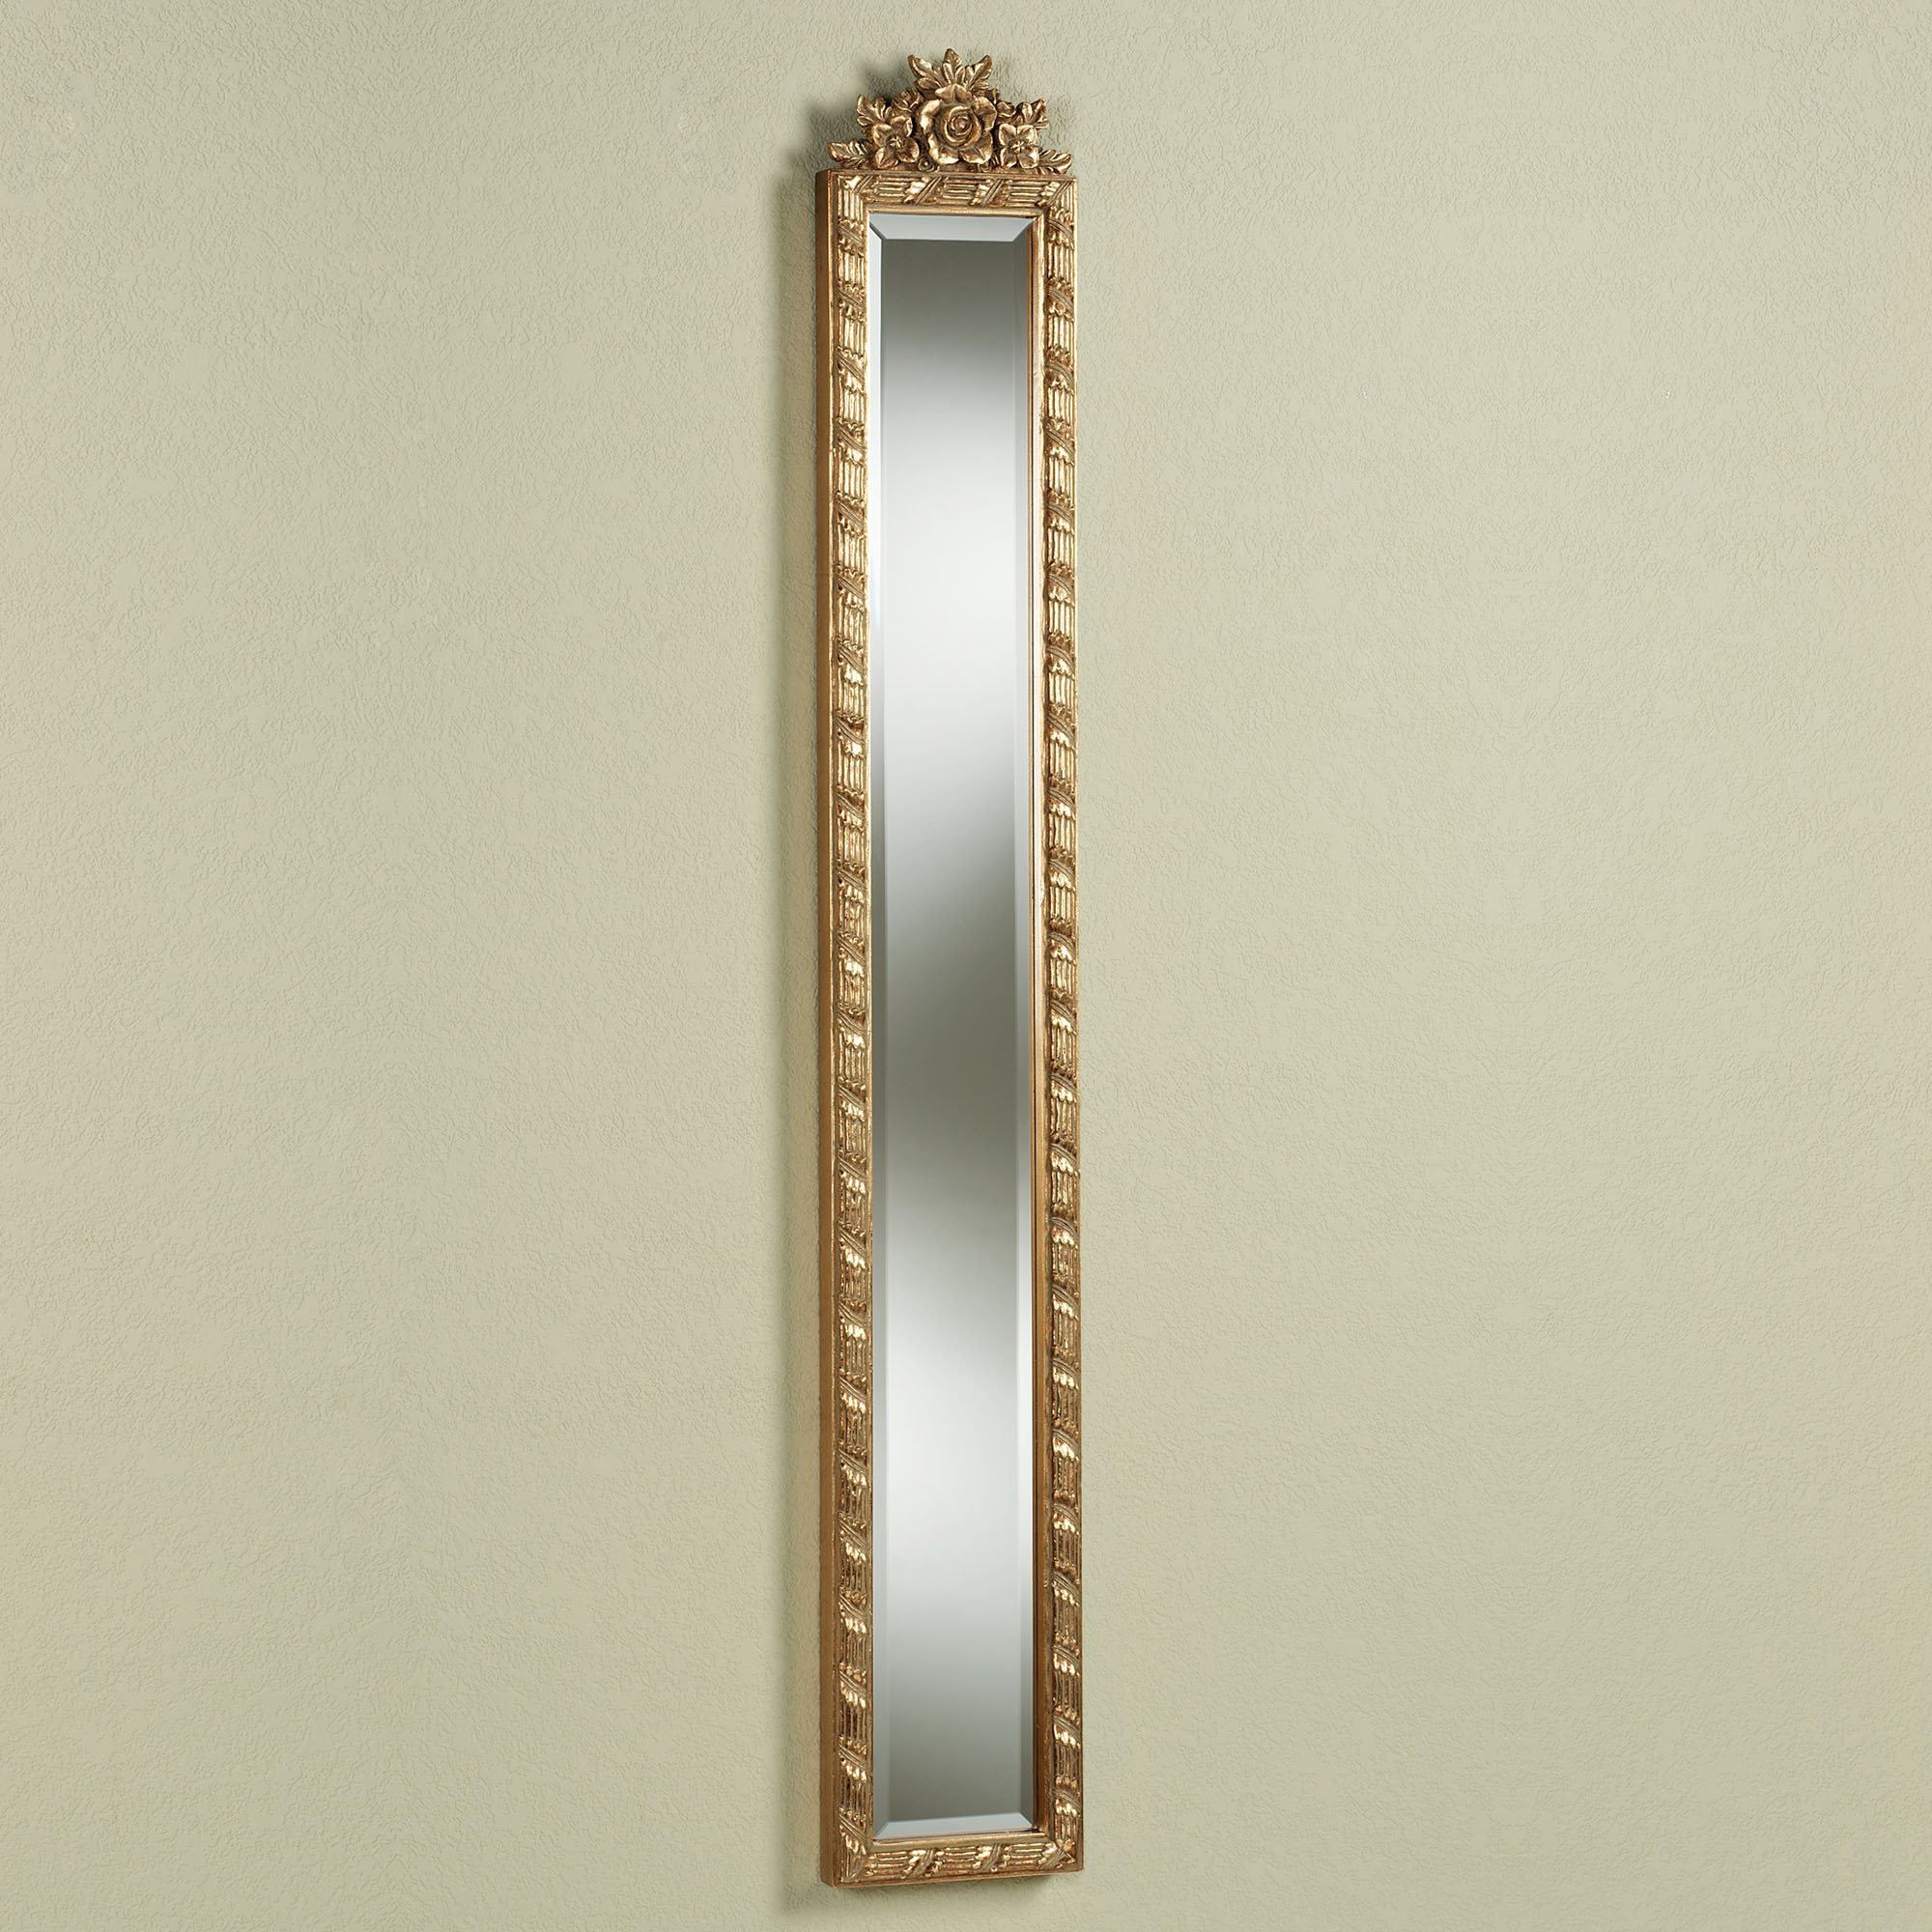 Giuliana Antique Gold Floral Wall Mirror Panel Intended For Juliana Accent Mirrors (View 14 of 20)